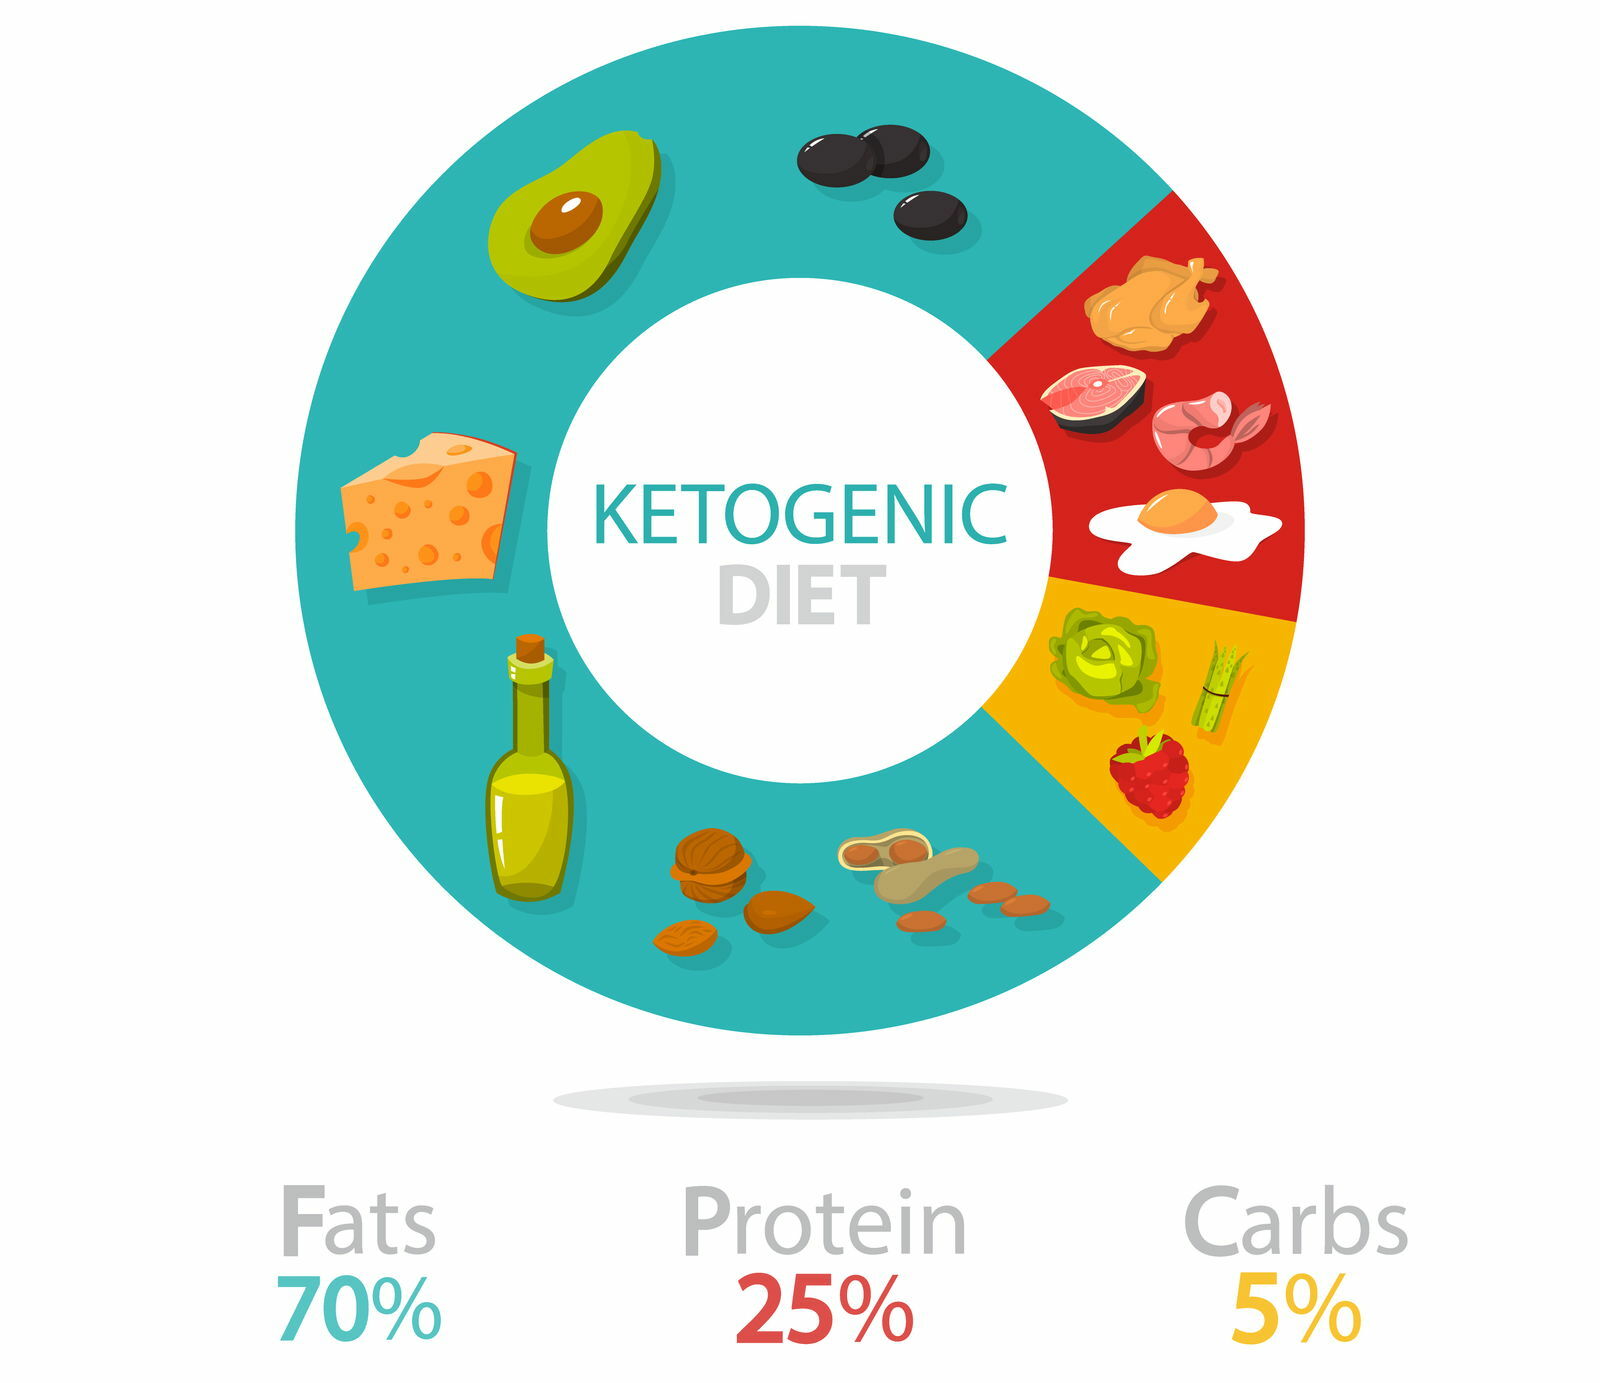 A hypothesis of nutrient subdivision in the ketogenic diet.